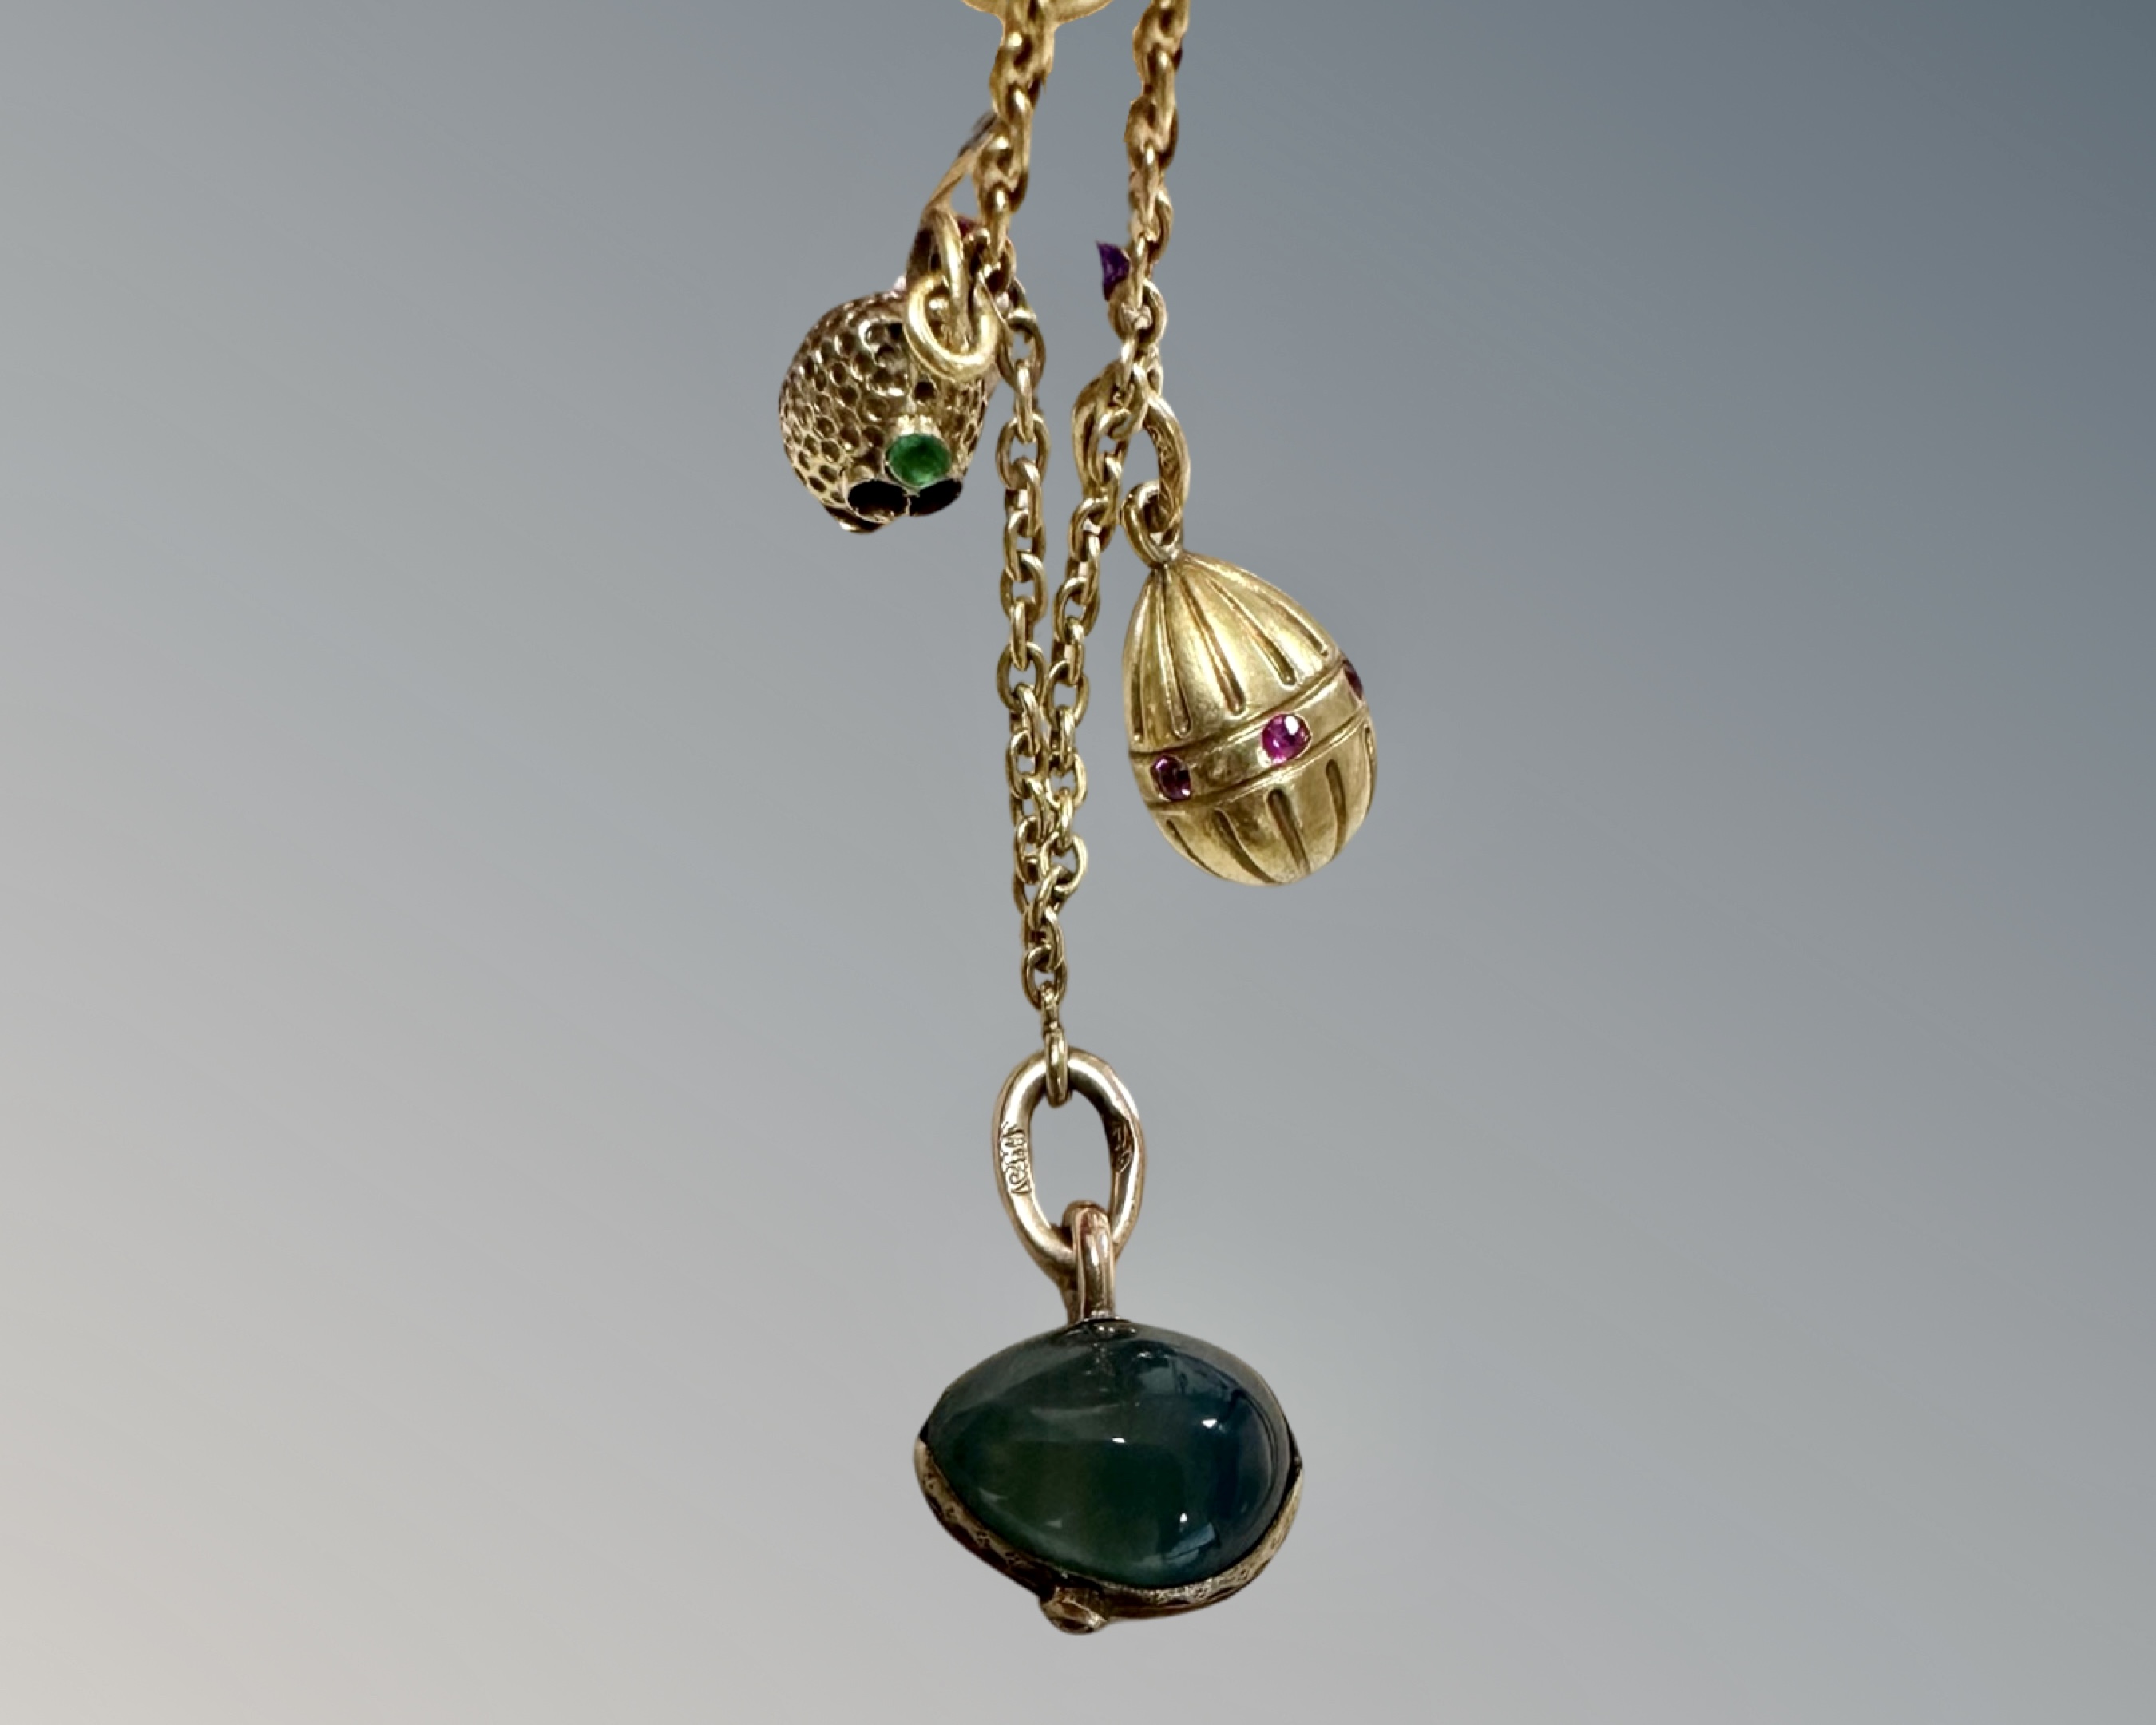 A fine early 20th century Russian enamel and gem set egg pendant necklace, - Image 6 of 9